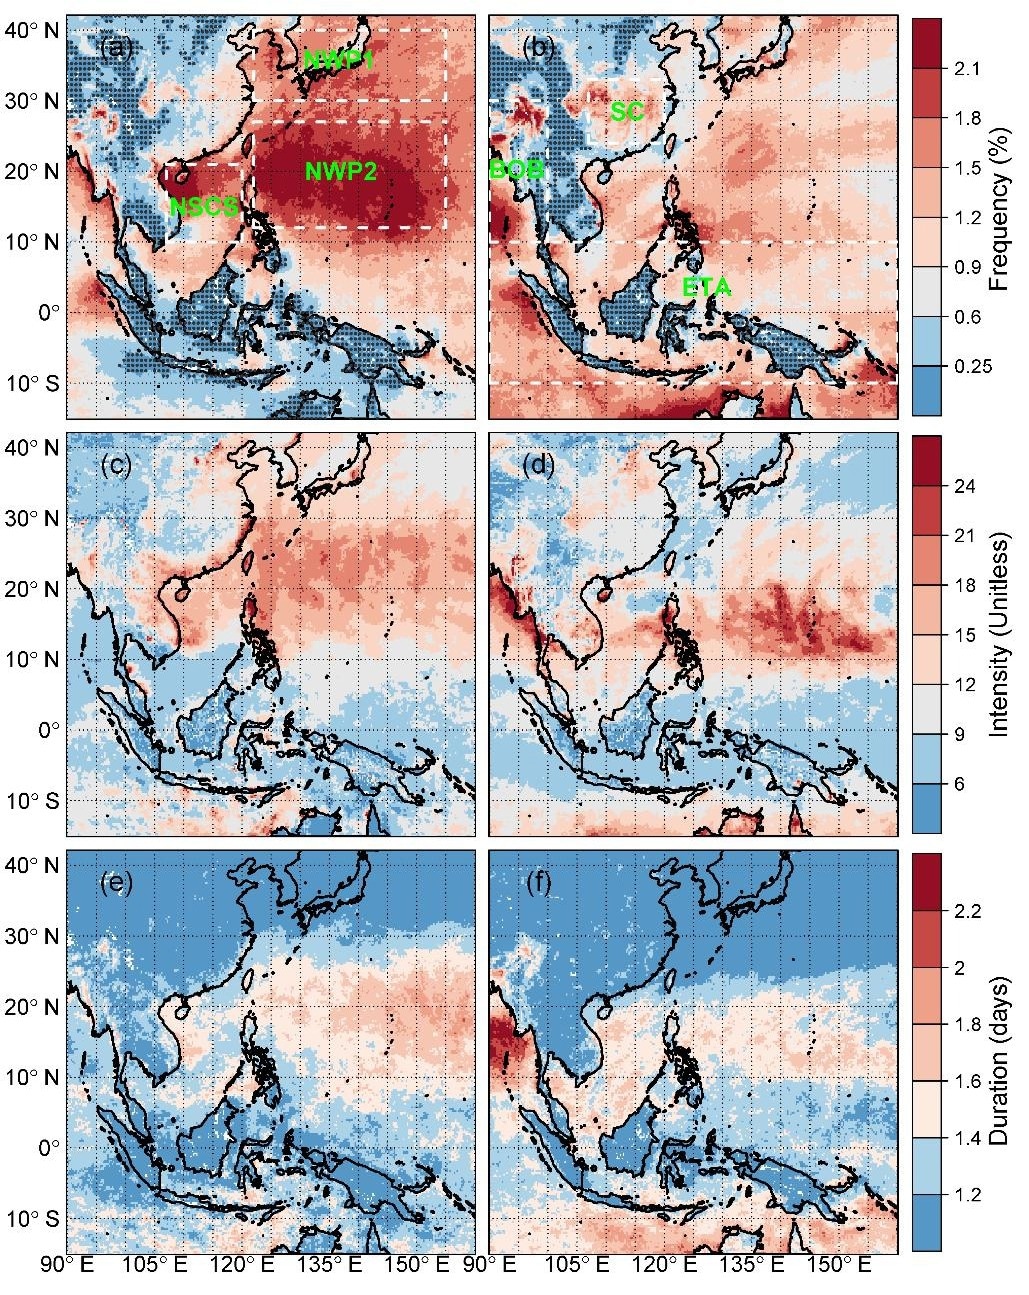 Study Discloses the Climatology, Variability, and Drivers of Compound Wind and Precipitation Extremes Across the Indo-Pacific